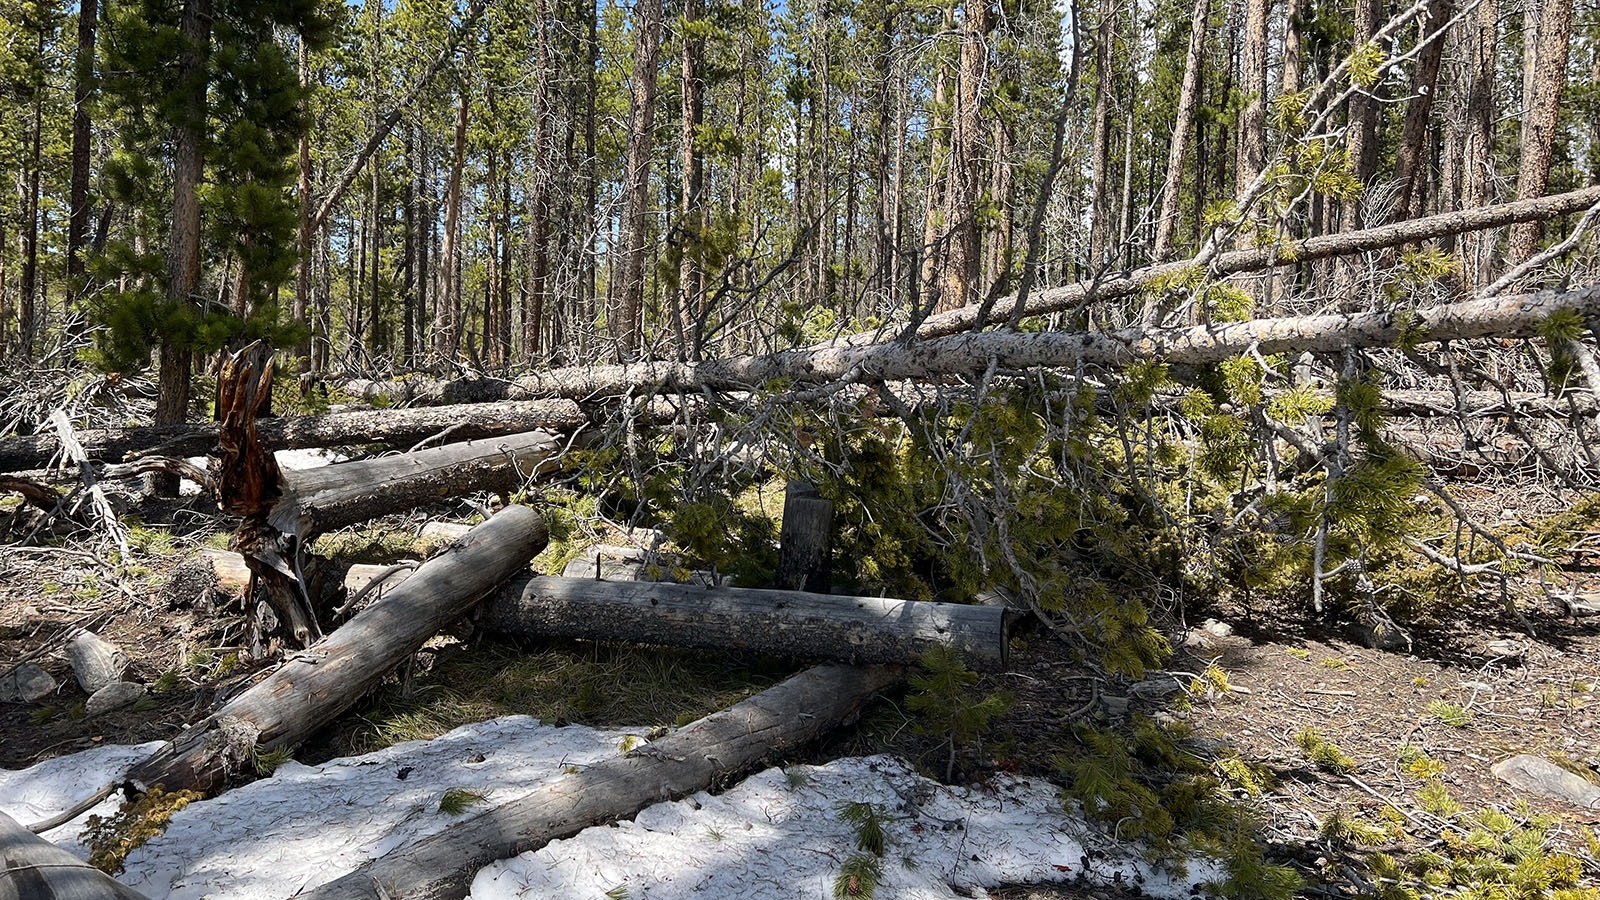 Piles of crisscrossed fallen trees, called jackstraw, are a common sight on the Medicine Bow National Forest near Laramie after recent windstorms.